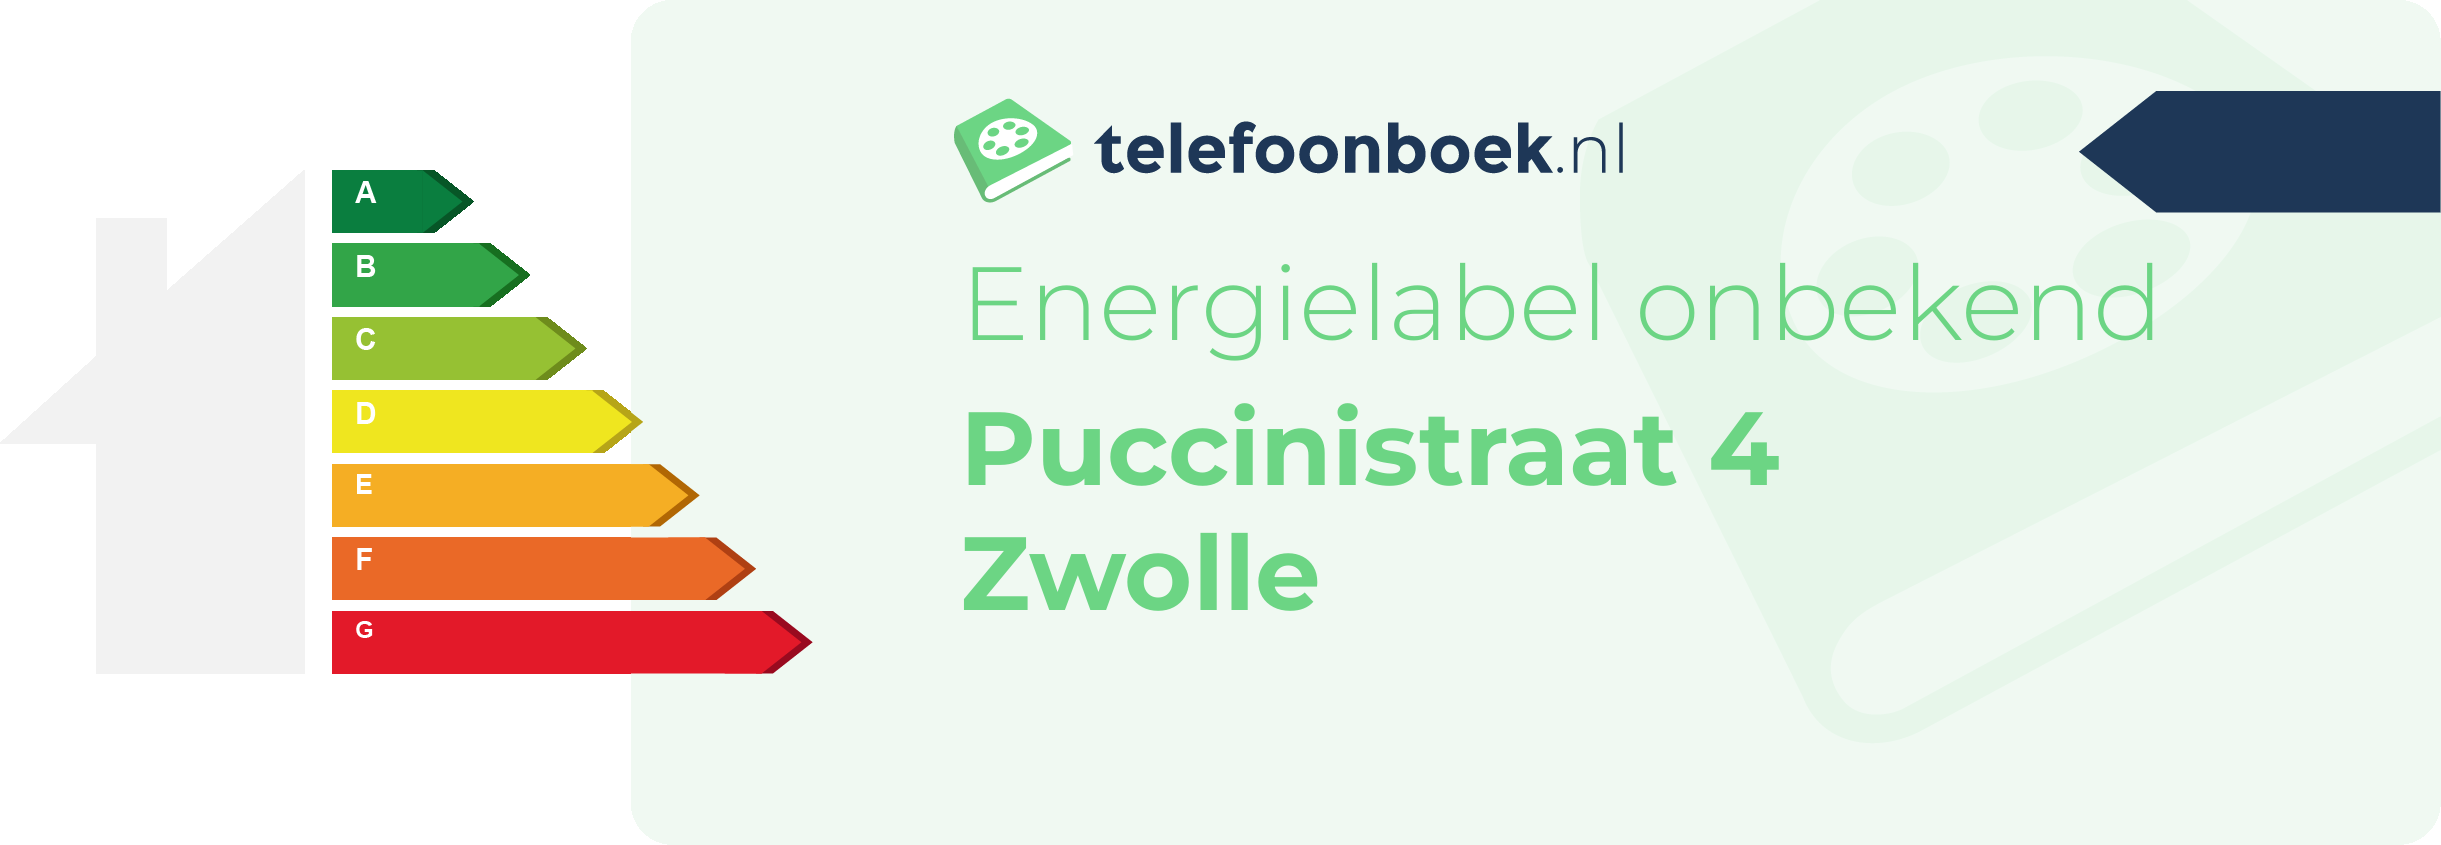 Energielabel Puccinistraat 4 Zwolle